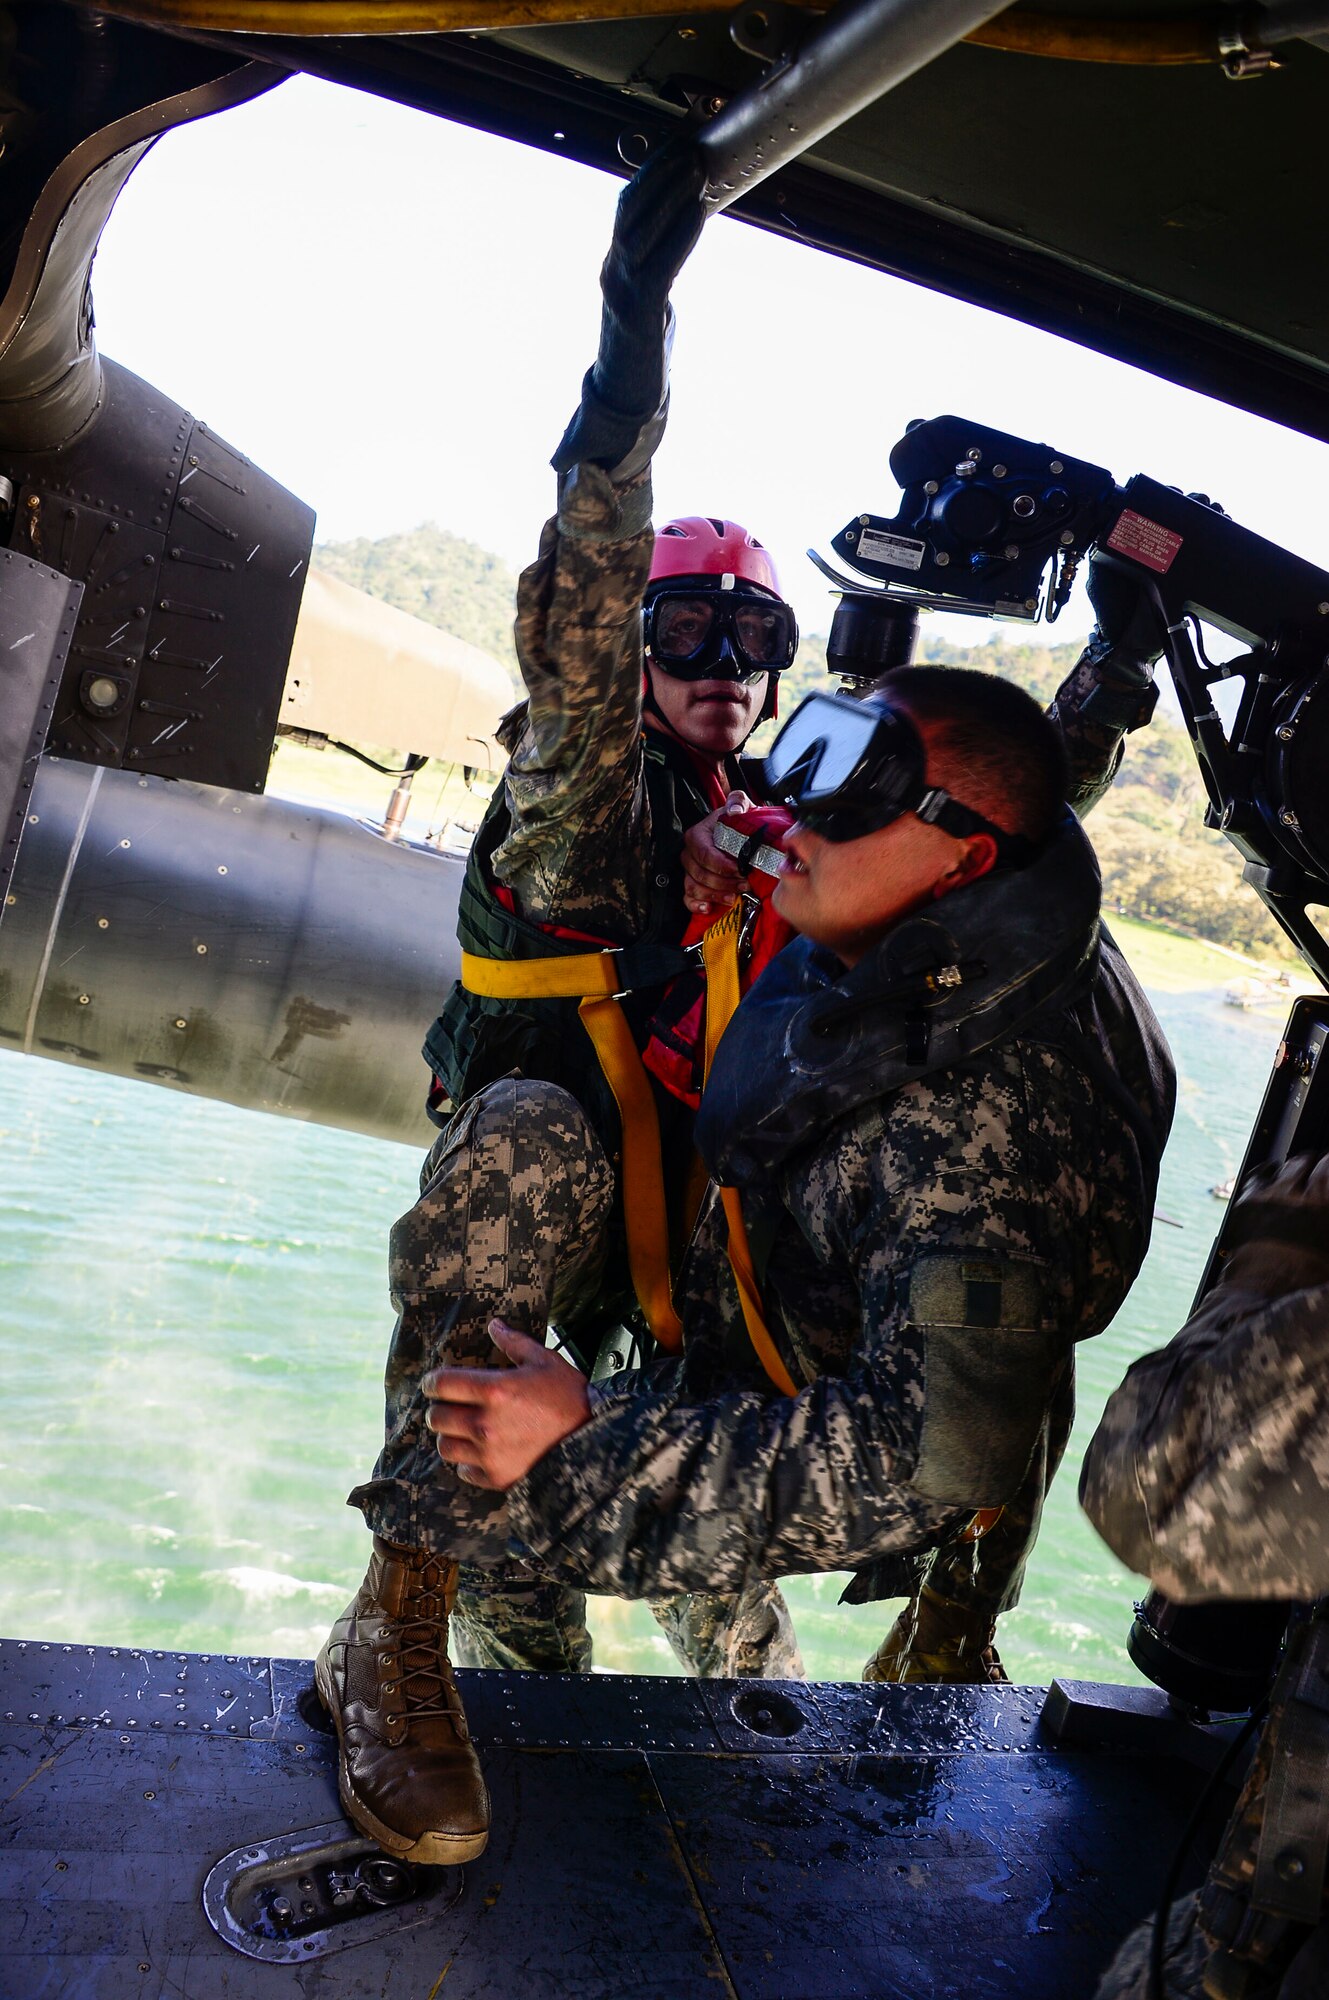 A medic from the 1-228th Aviation Battalion climbs in to a UH-60 Black Hawk helicopter after being lowered to retrieve a the U.S. Army Special Operations member from Lake Yojoa, Honduras, Jan. 22, 2015.   The 1-228th Aviation Regiment partnered with U.S. Army Special Operations personnel to practice recovering live personnel. The over-water hoist training was held to ensure members of Joint Task Force-Bravo are planning and preparing for crisis and contingency response, as well as countering transnational organized crime, and counterterrorism operations as part of U.S. Southern Command’s mission. Contingency planning prepares the command for various scenarios that pose the greatest probability of challenging our regional partners or threatening our national interests. (U.S. Air Force photo/Tech. Sgt. Heather Redman)